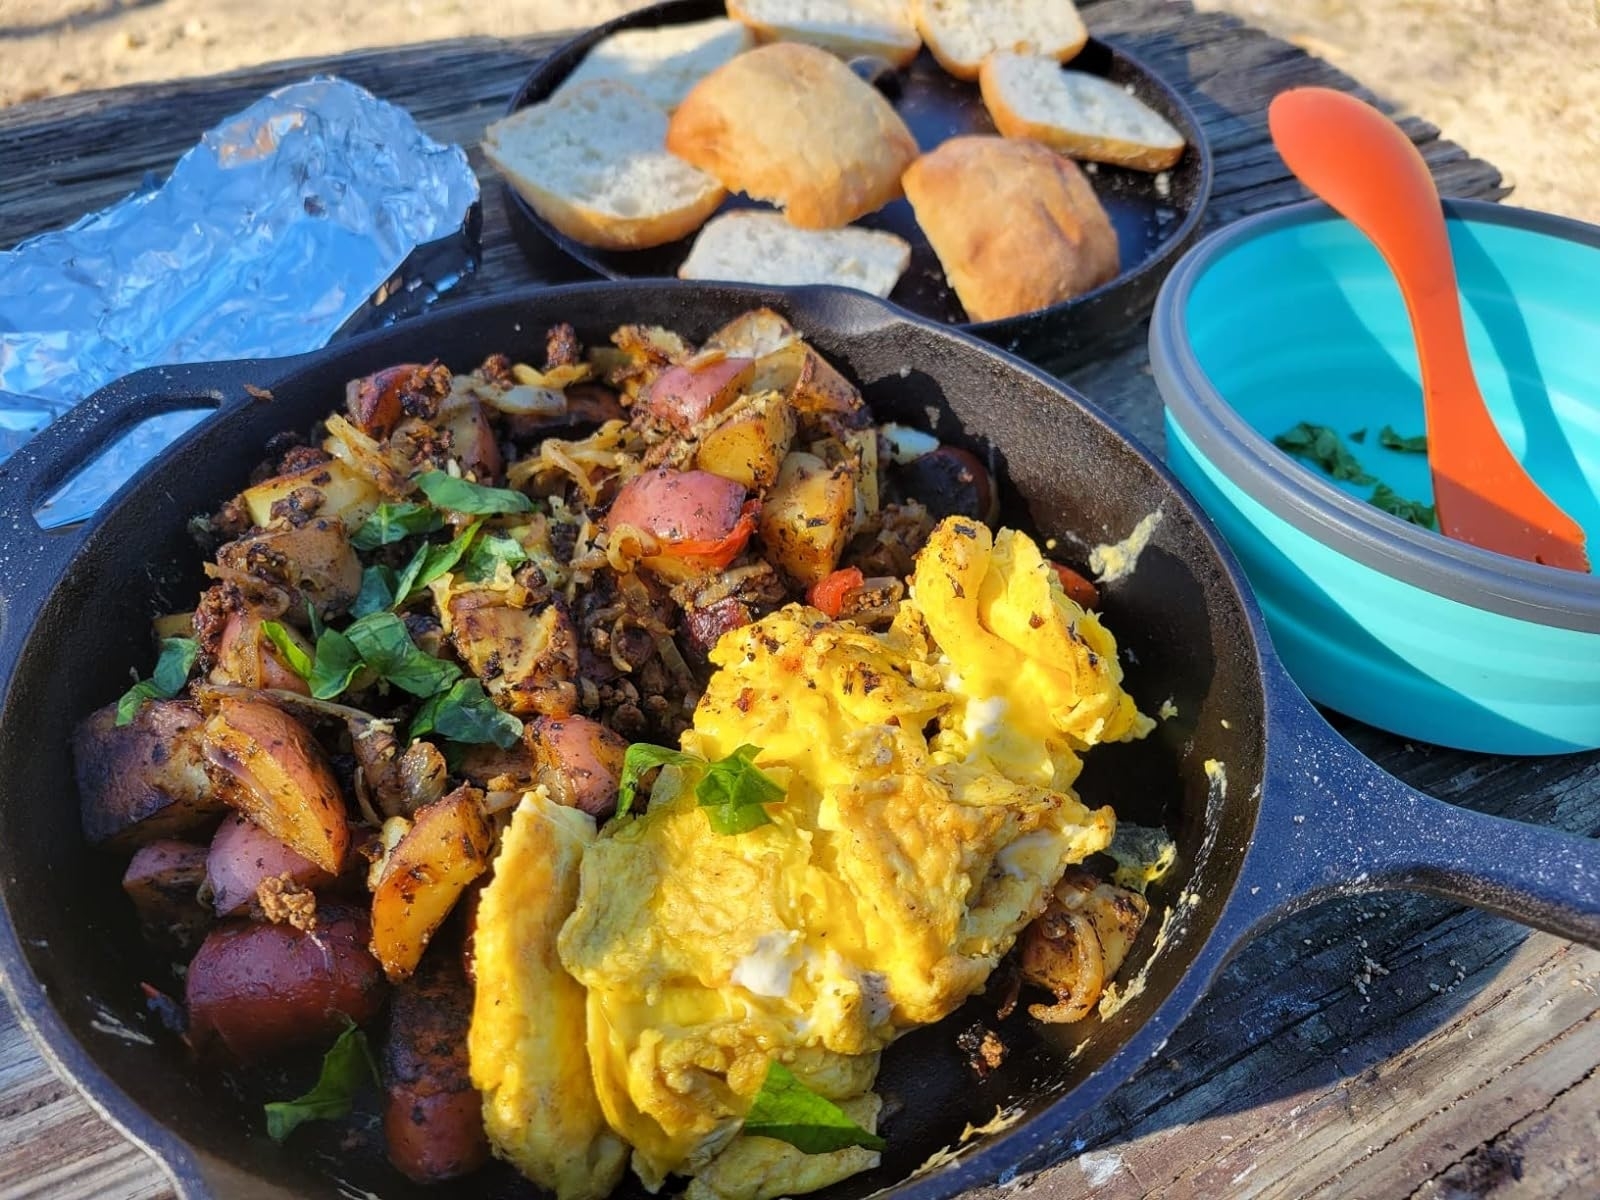 Reviewer&#x27;s photo of the skillet with an egg scramble and potatoes inside